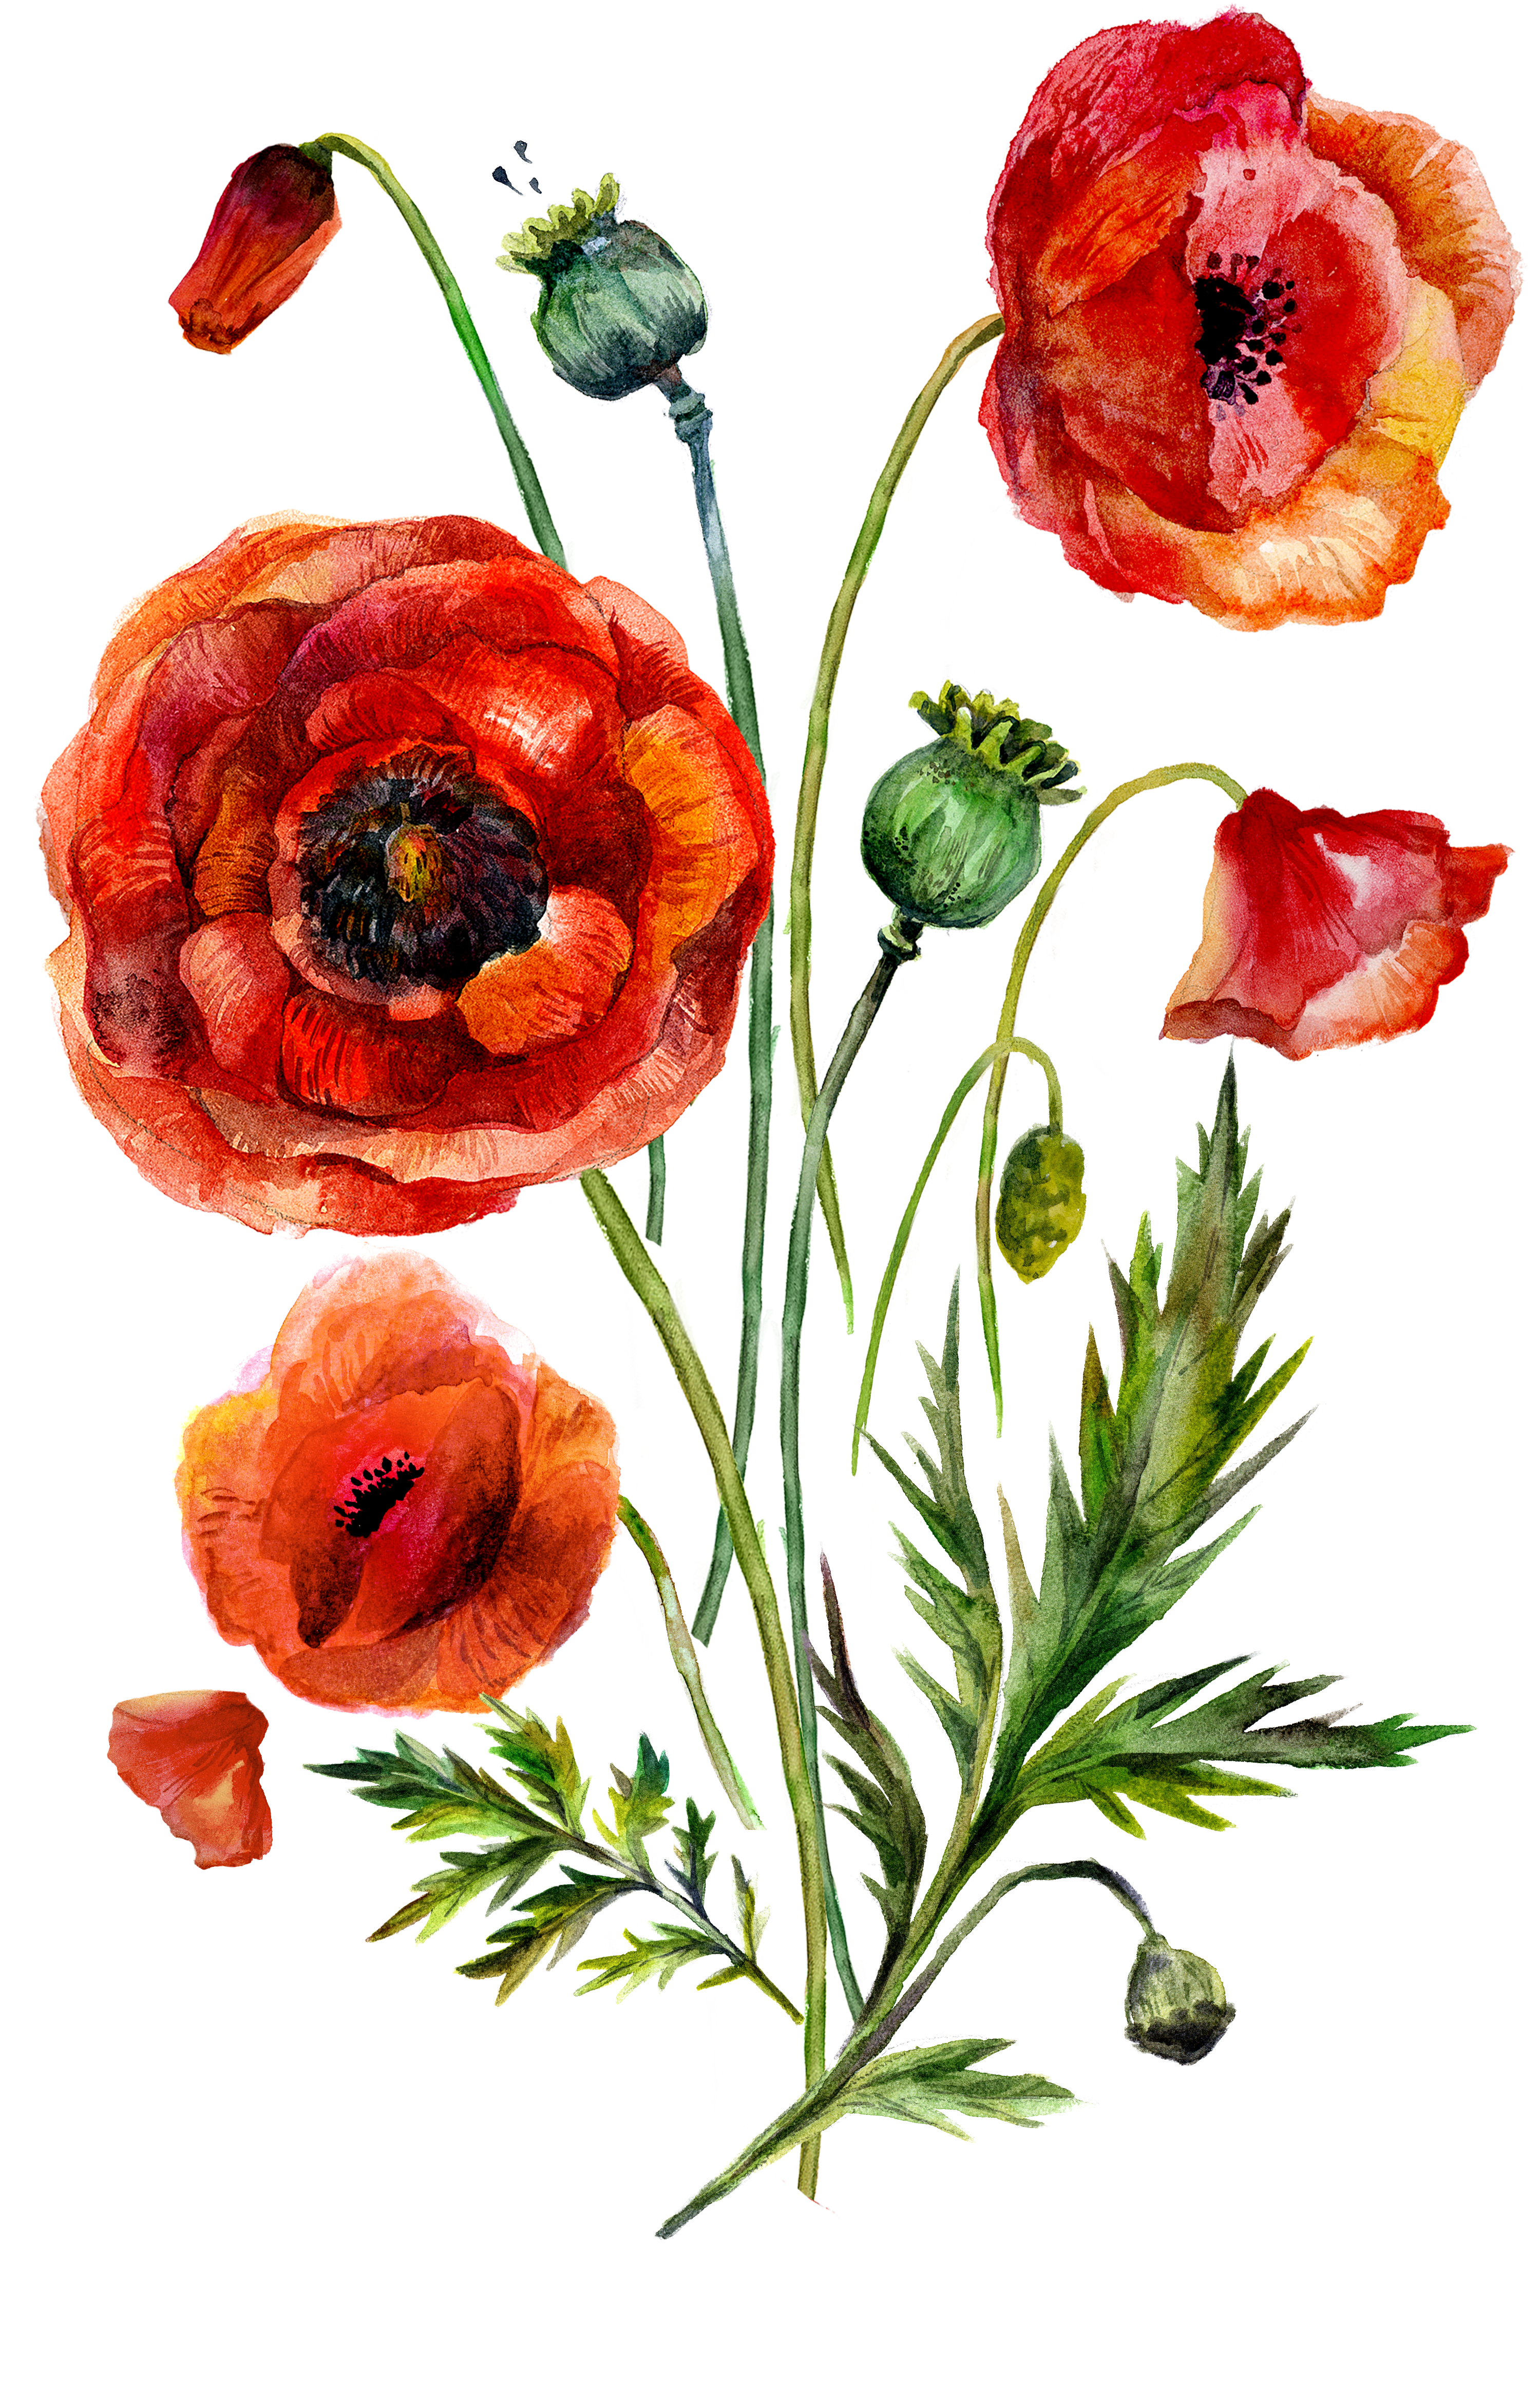 Watercolor Painting Common Poppy Illustration - Watercolor Painting Common Poppy Illustration (3535x5000)